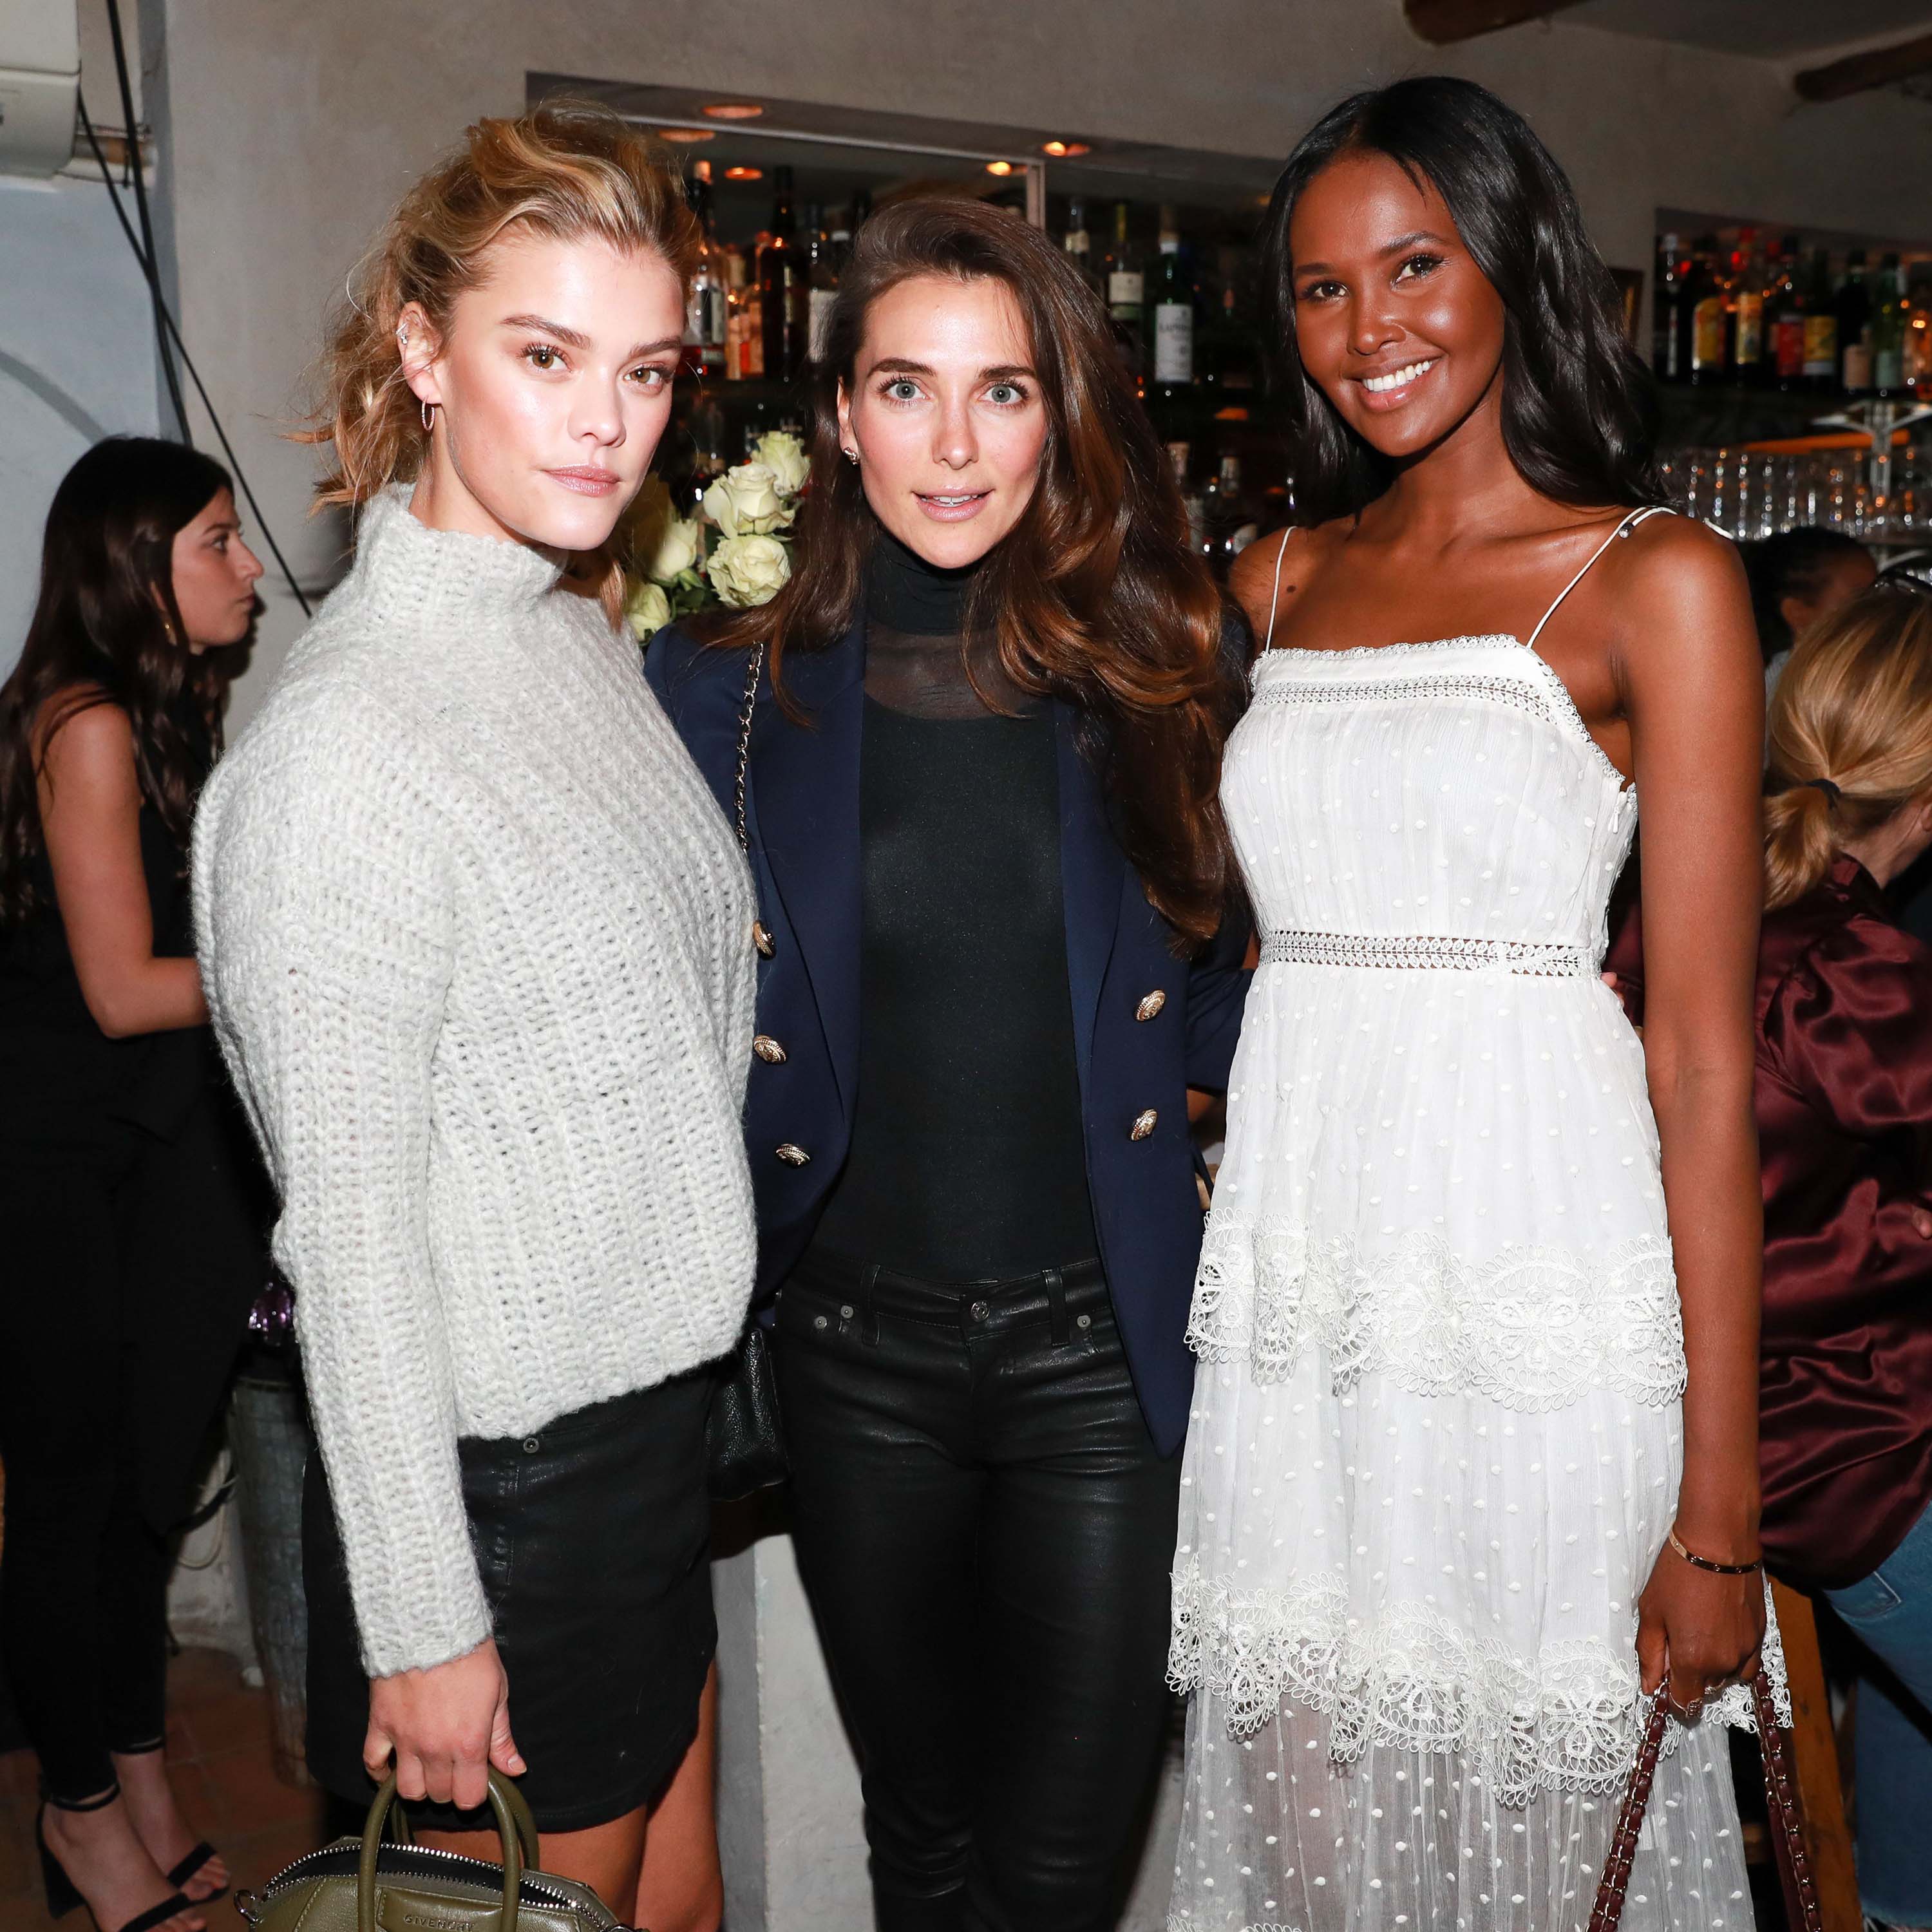 Nina Agdal attends AerieREAL Role Models dinner party